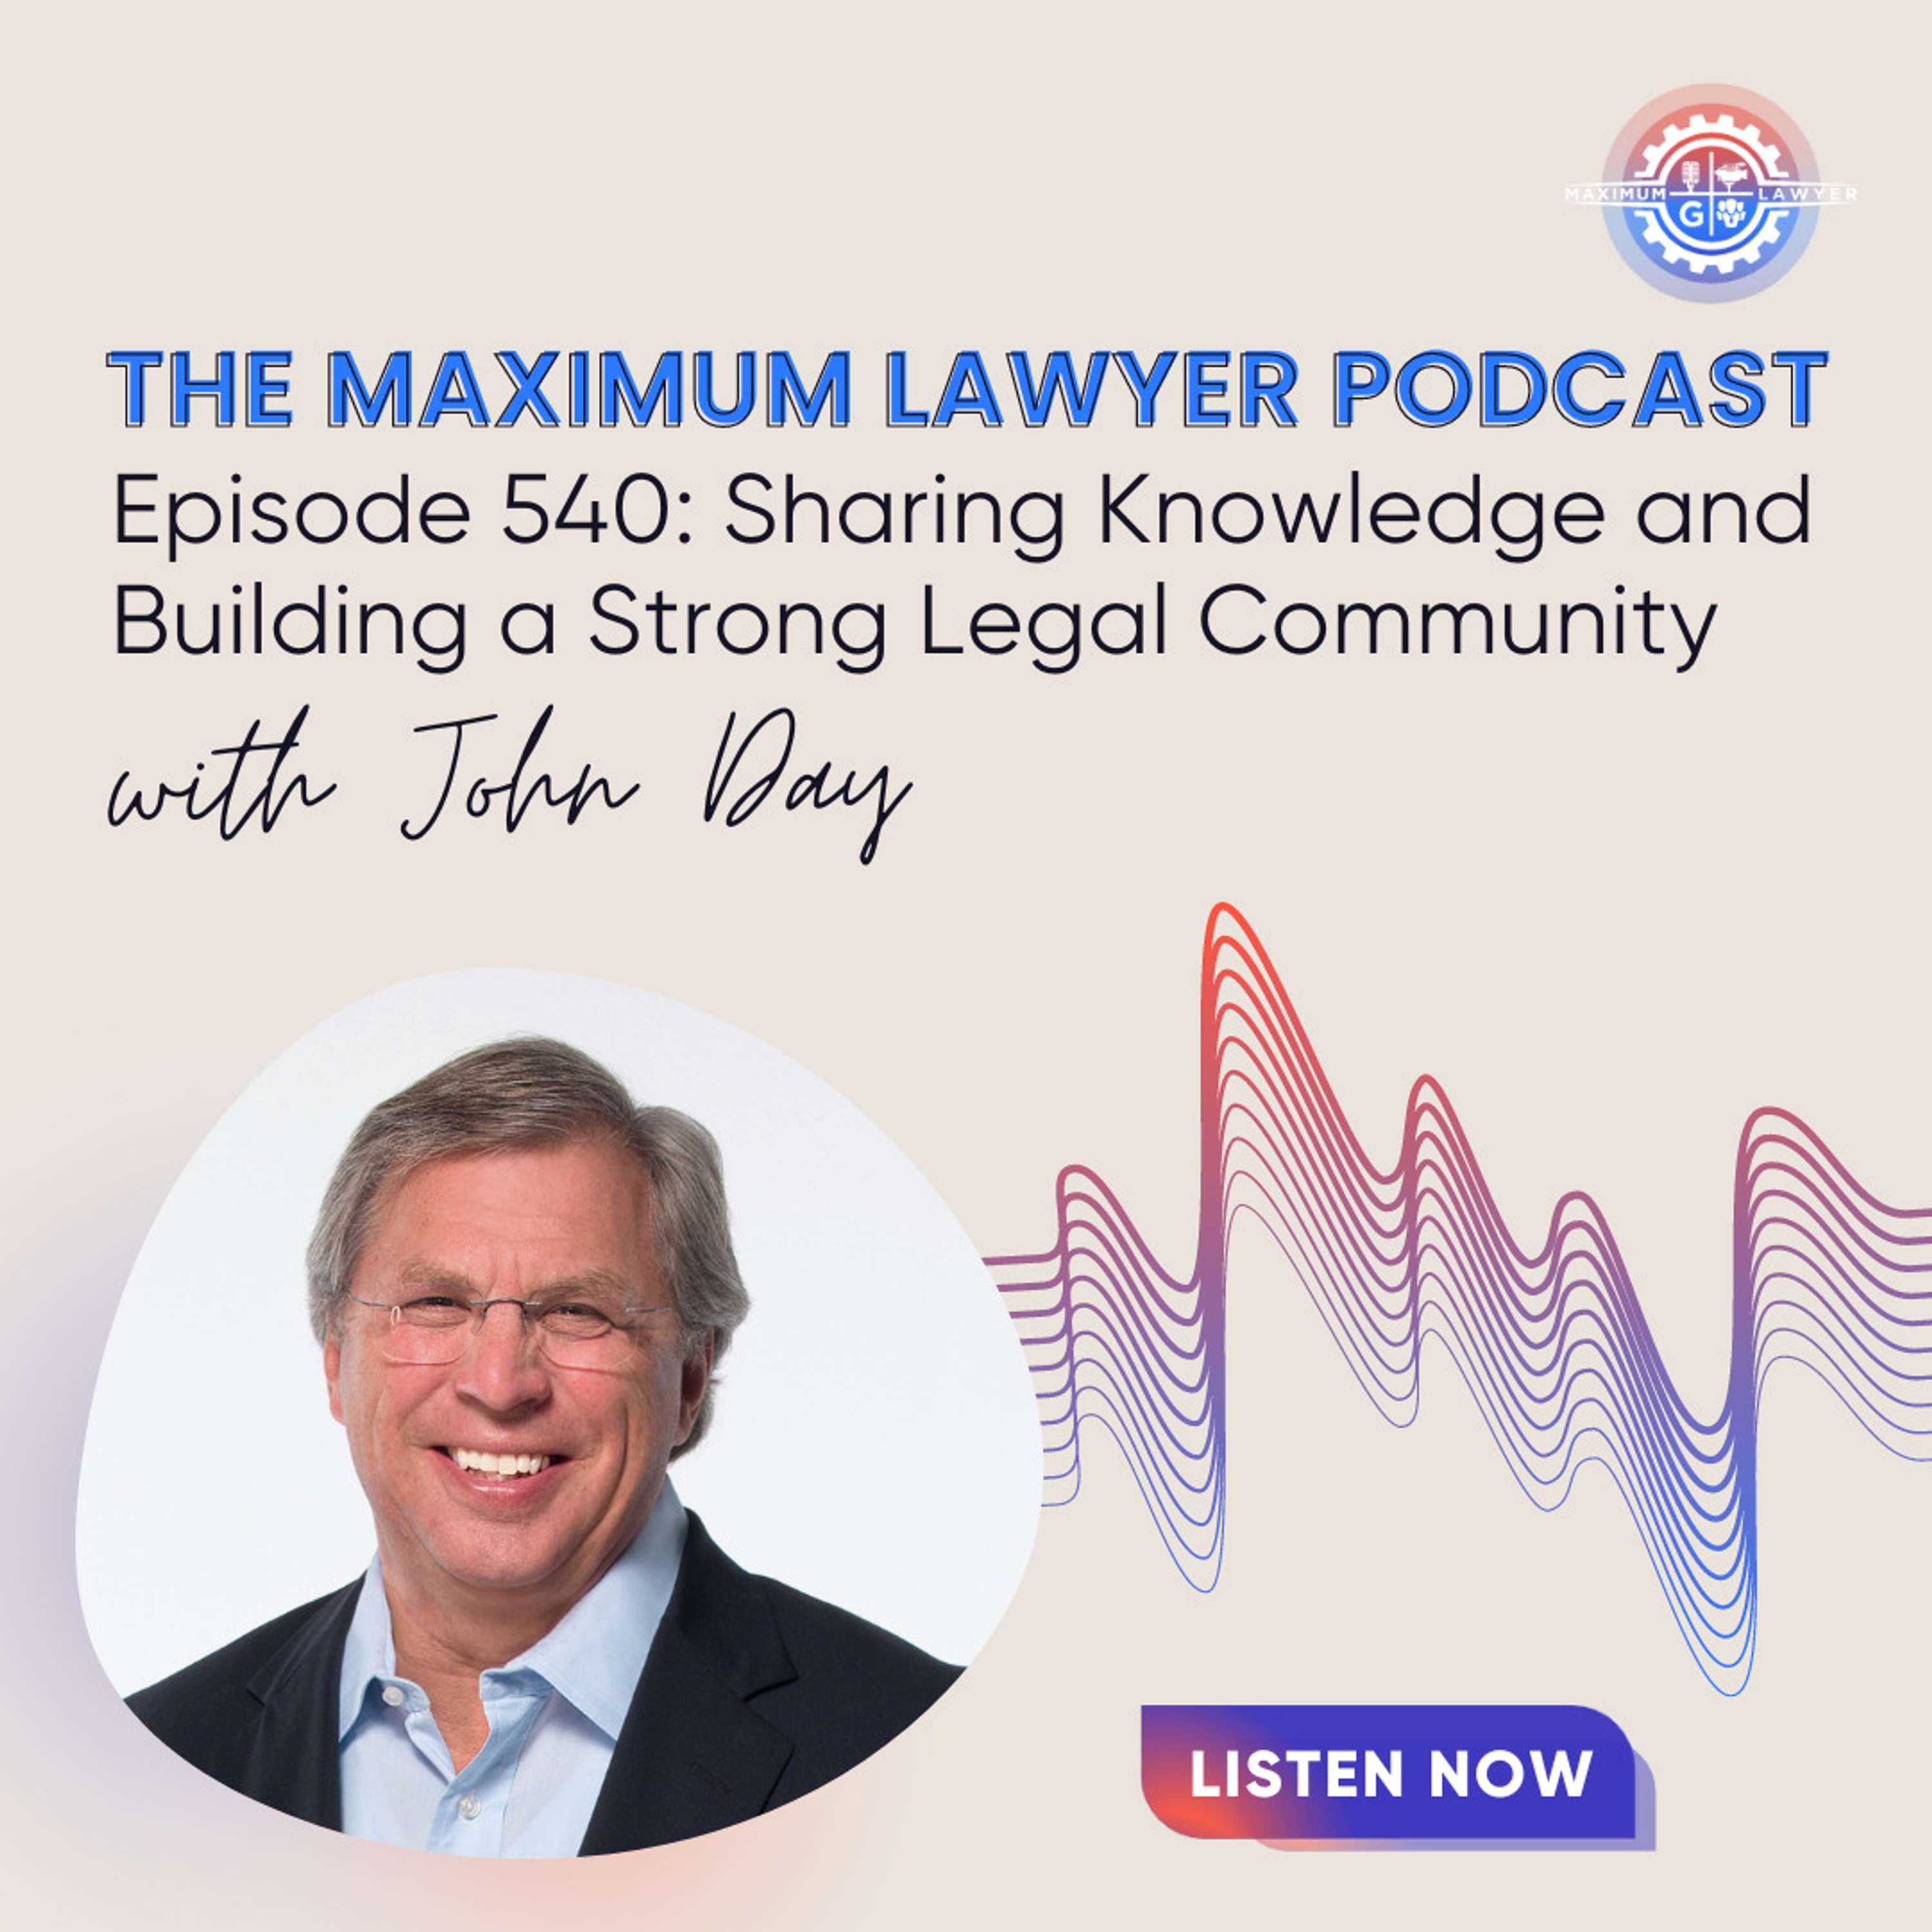 Sharing Knowledge and Building a Strong Legal Community with John Day